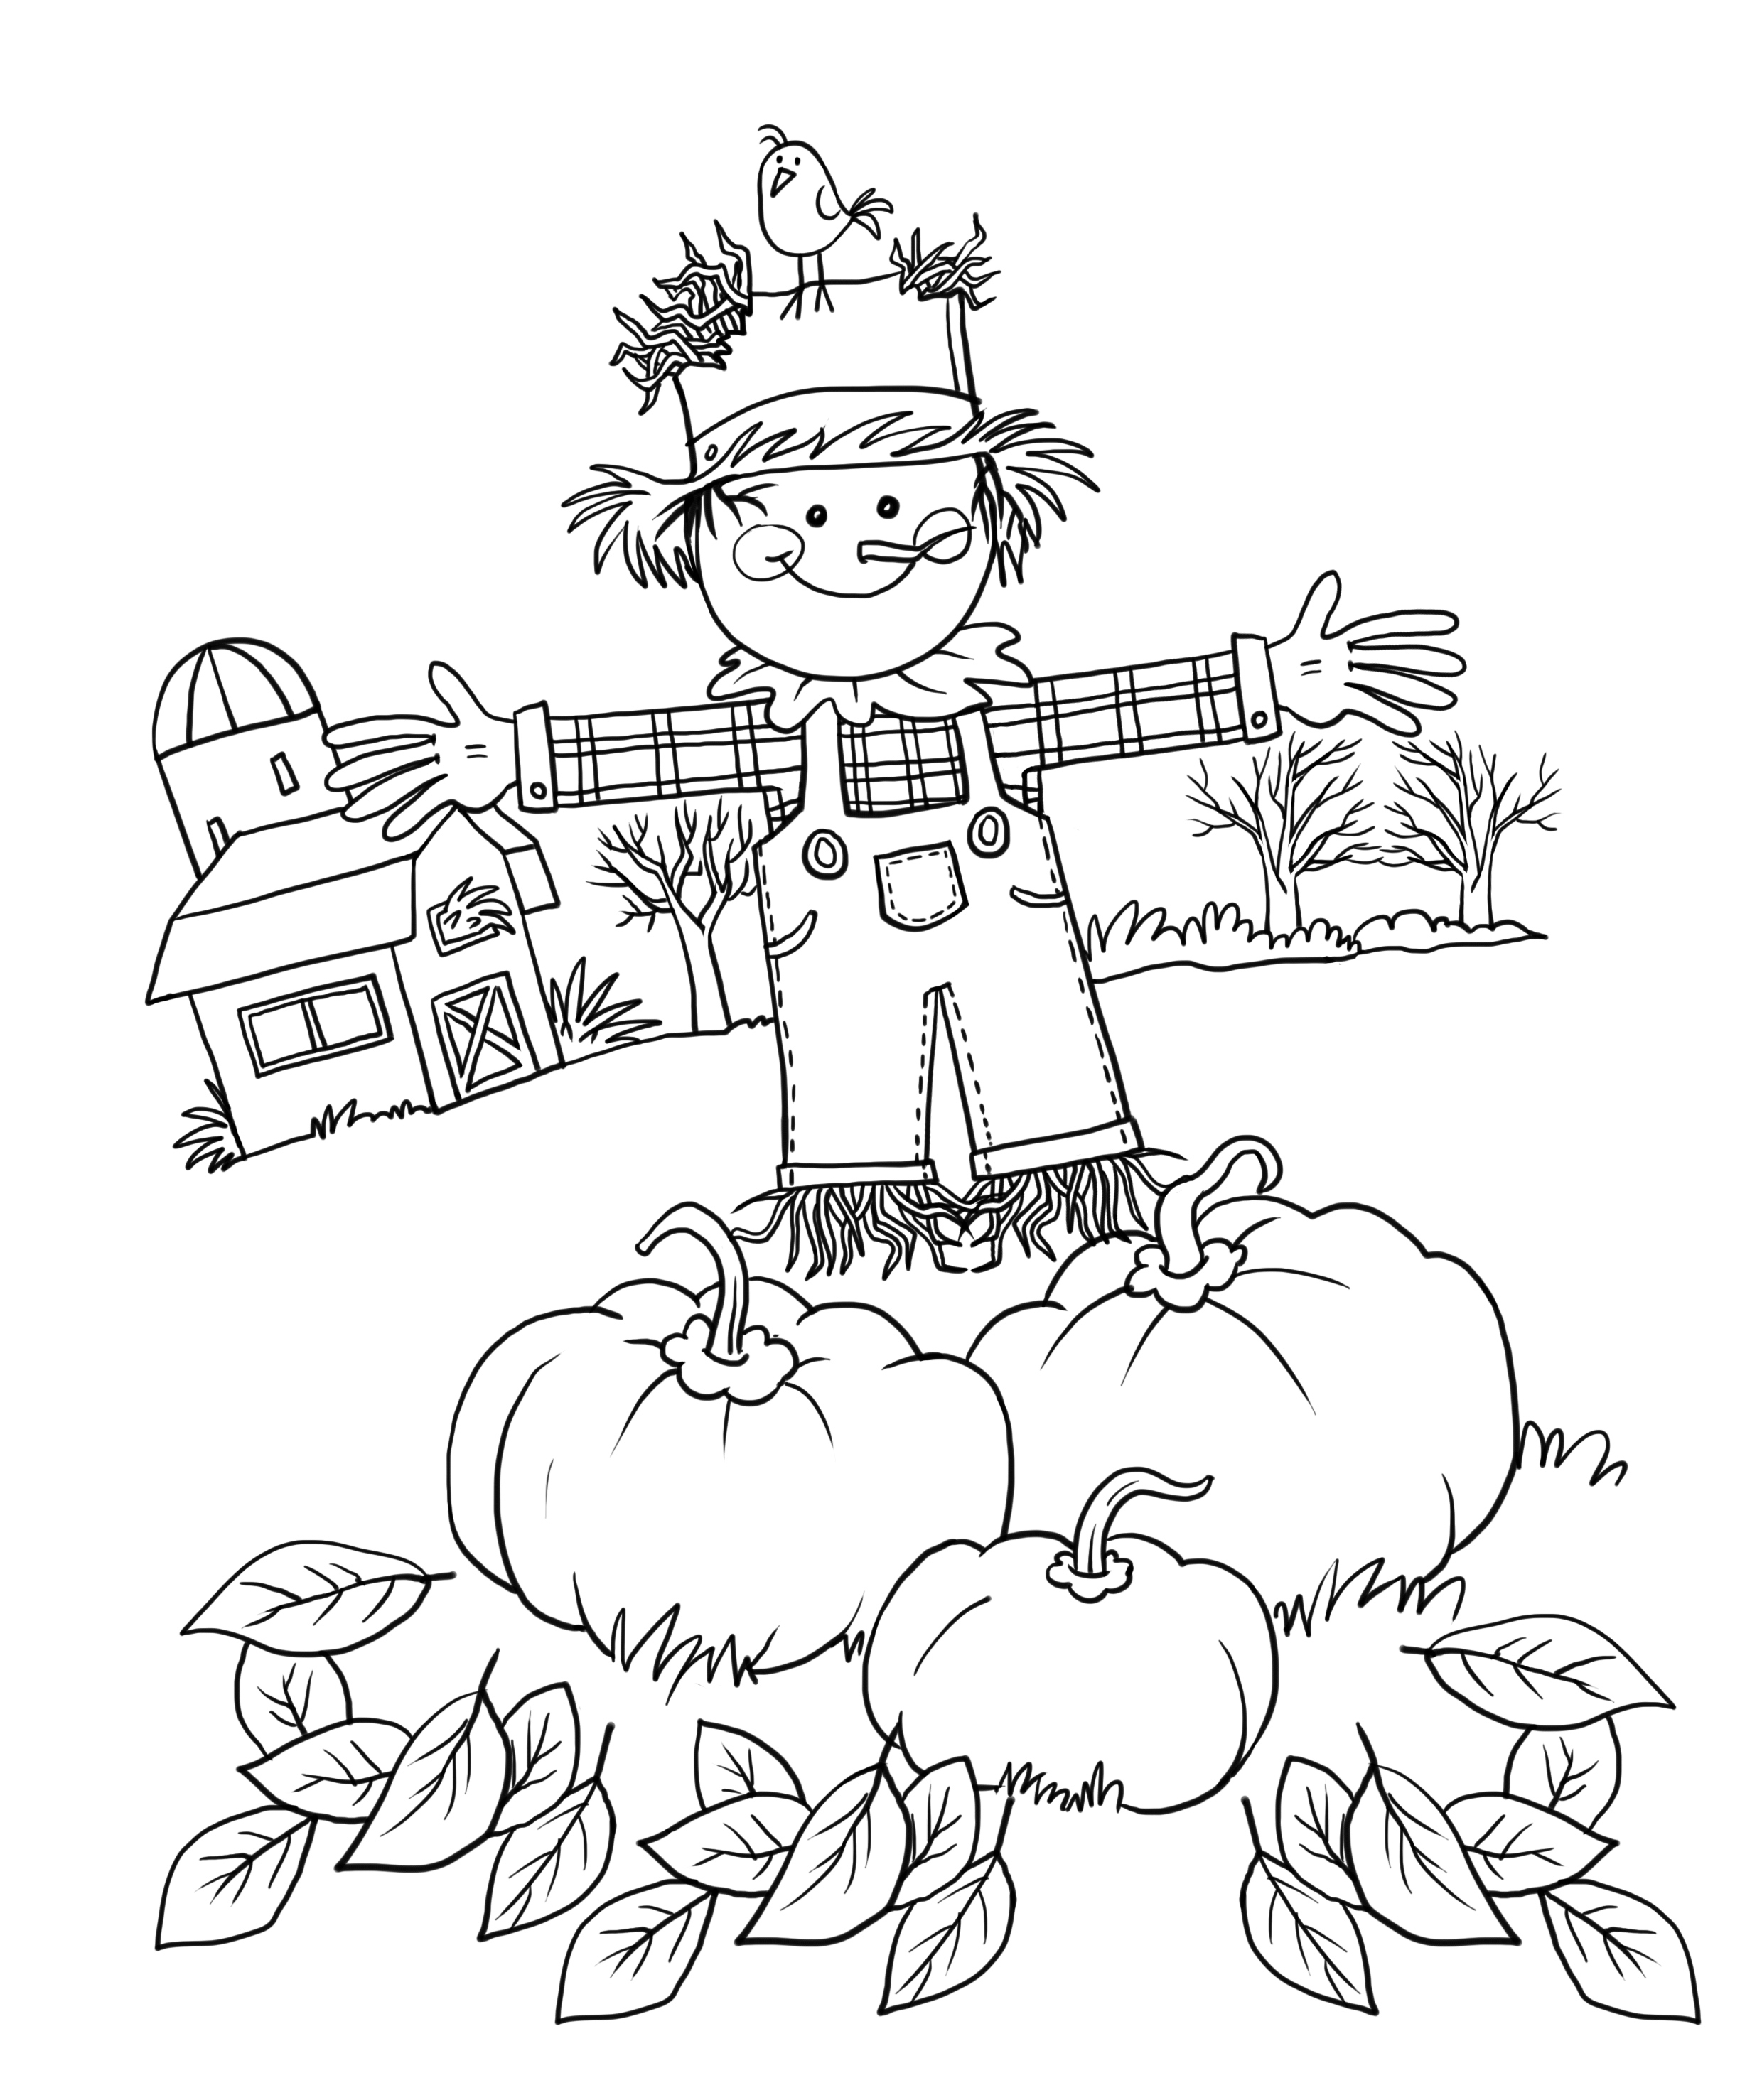 Fall Thanksgiving Coloring Pages at GetColorings.com | Free printable